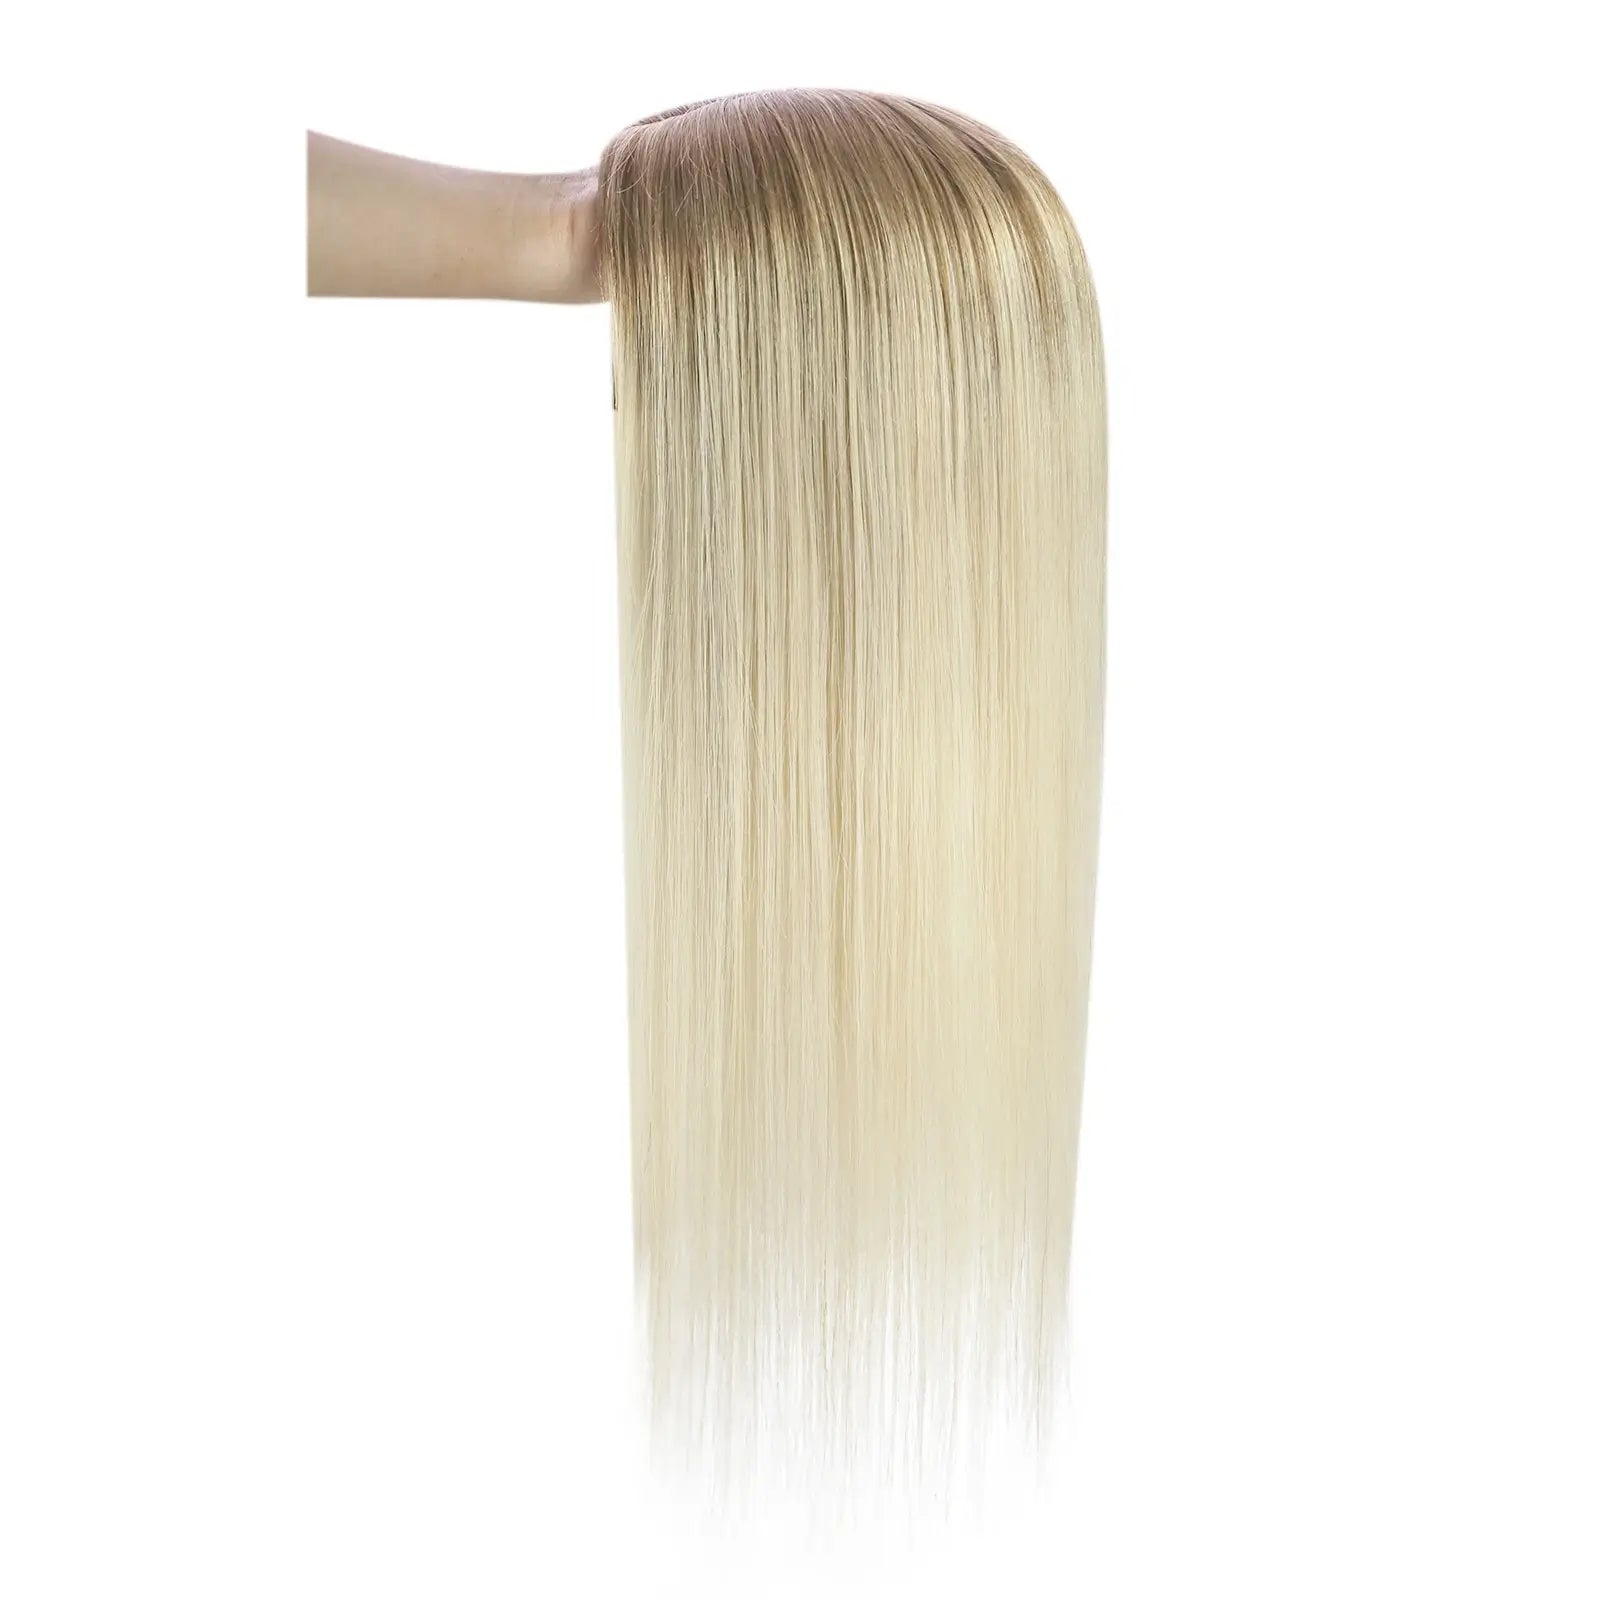 Remy Hair Ombre Brown to Blonde Wiglets Hairpieces For Thinning Hair